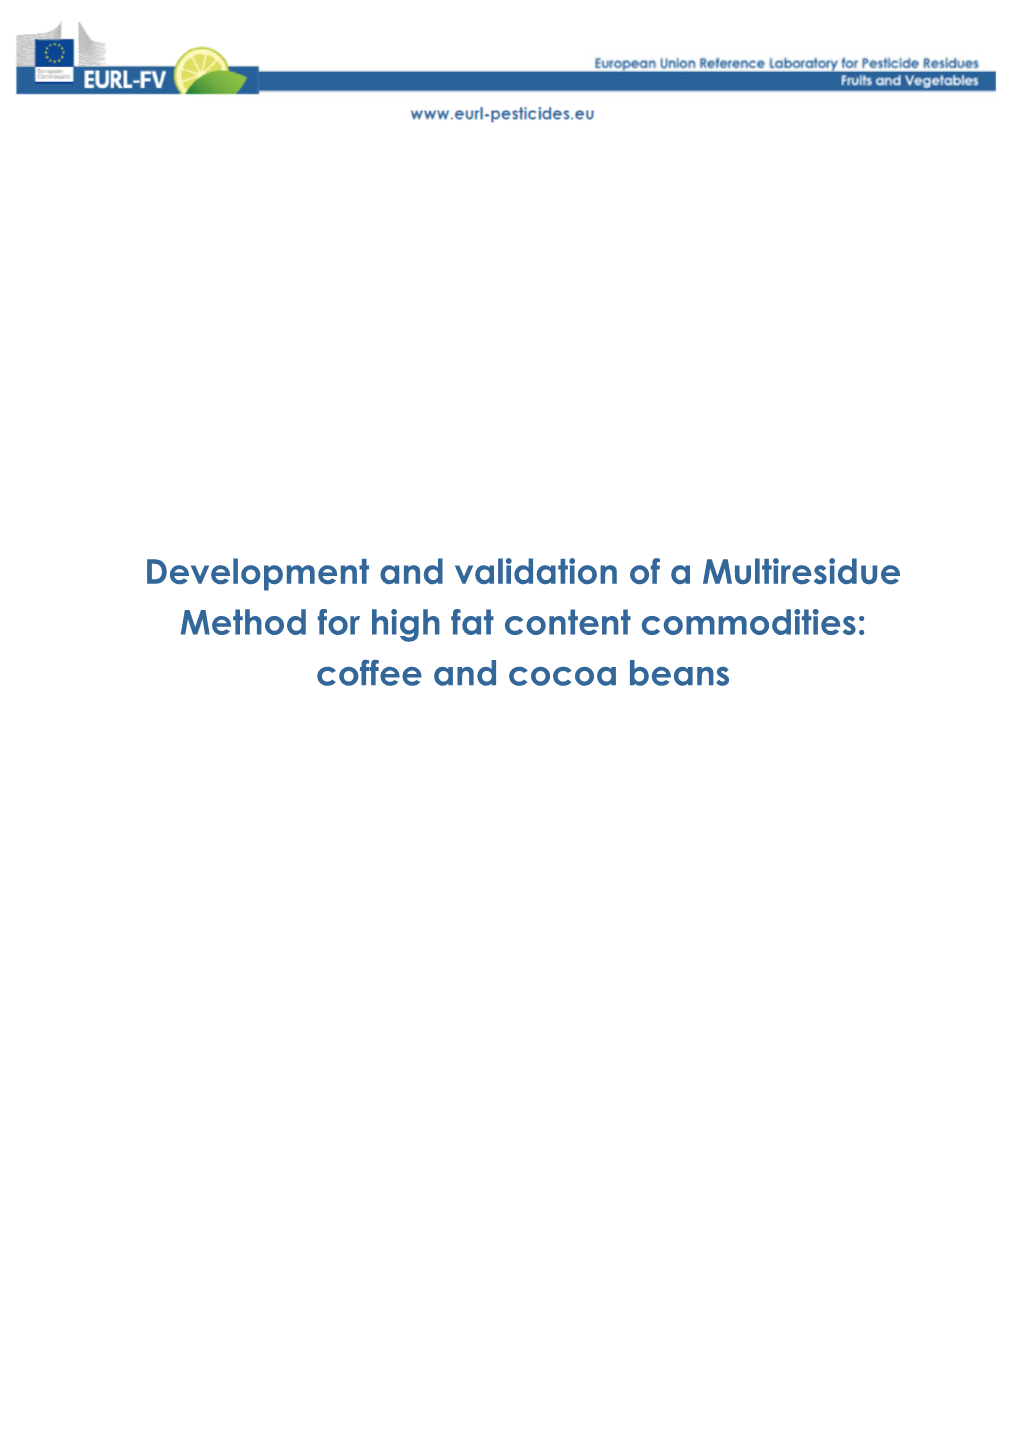 Development and Validation of a Multiresidue Method for High Fat Content Commodities: Coffee and Cocoa Beans